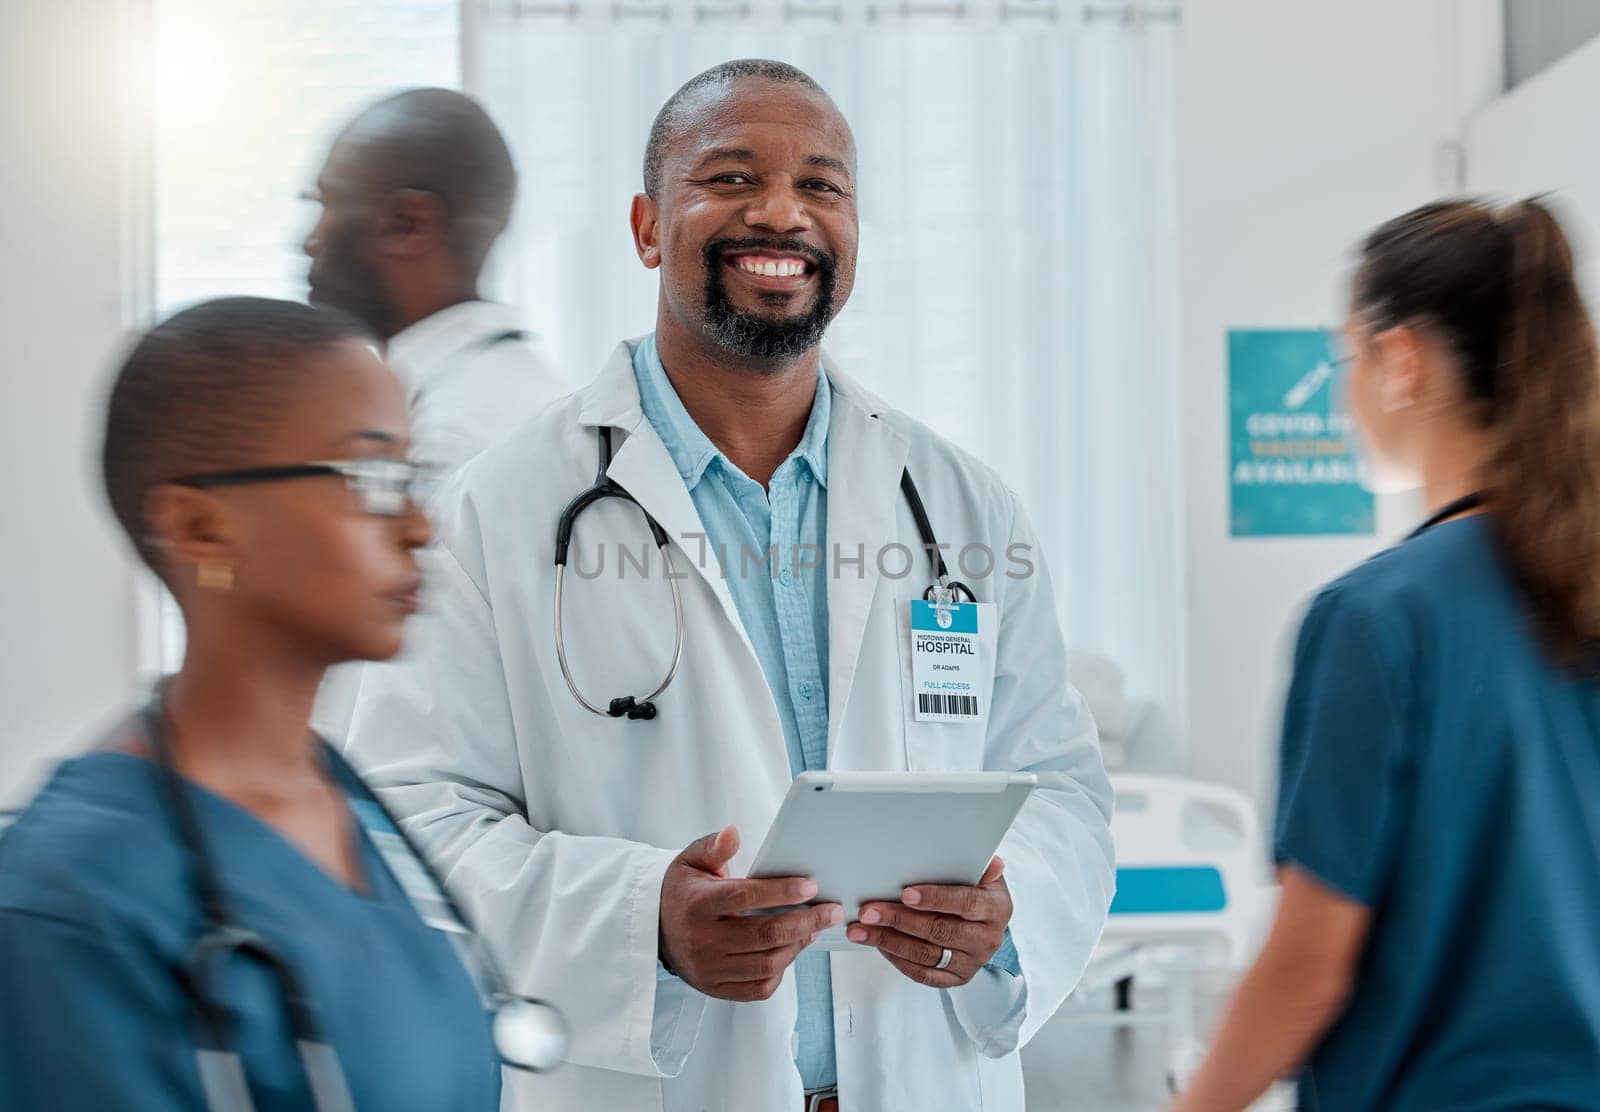 Busy hospital, tablet and portrait of doctor for medical care, wellness app and support with blur of people. Healthcare, digital tech and happy black man for service, consulting and health insurance.